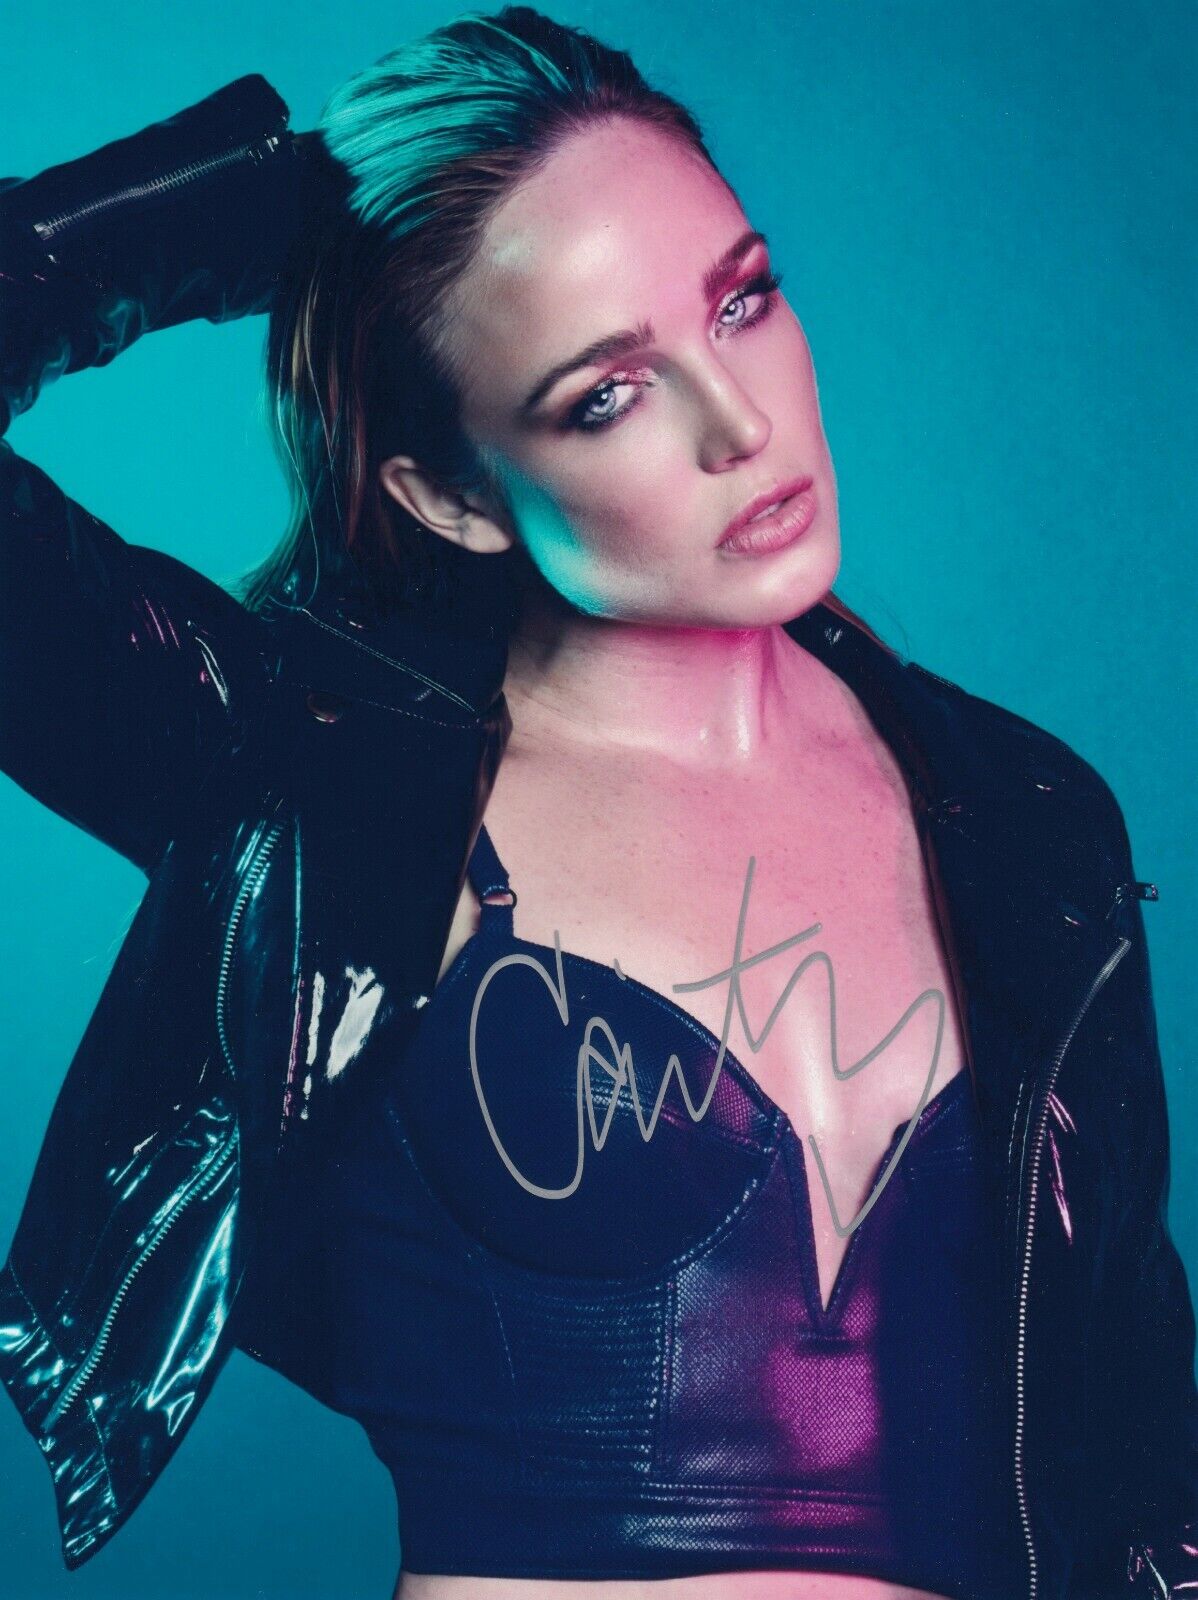 Caity Lotz Signed Auto 8 x 10 Photo Poster paintinggraph